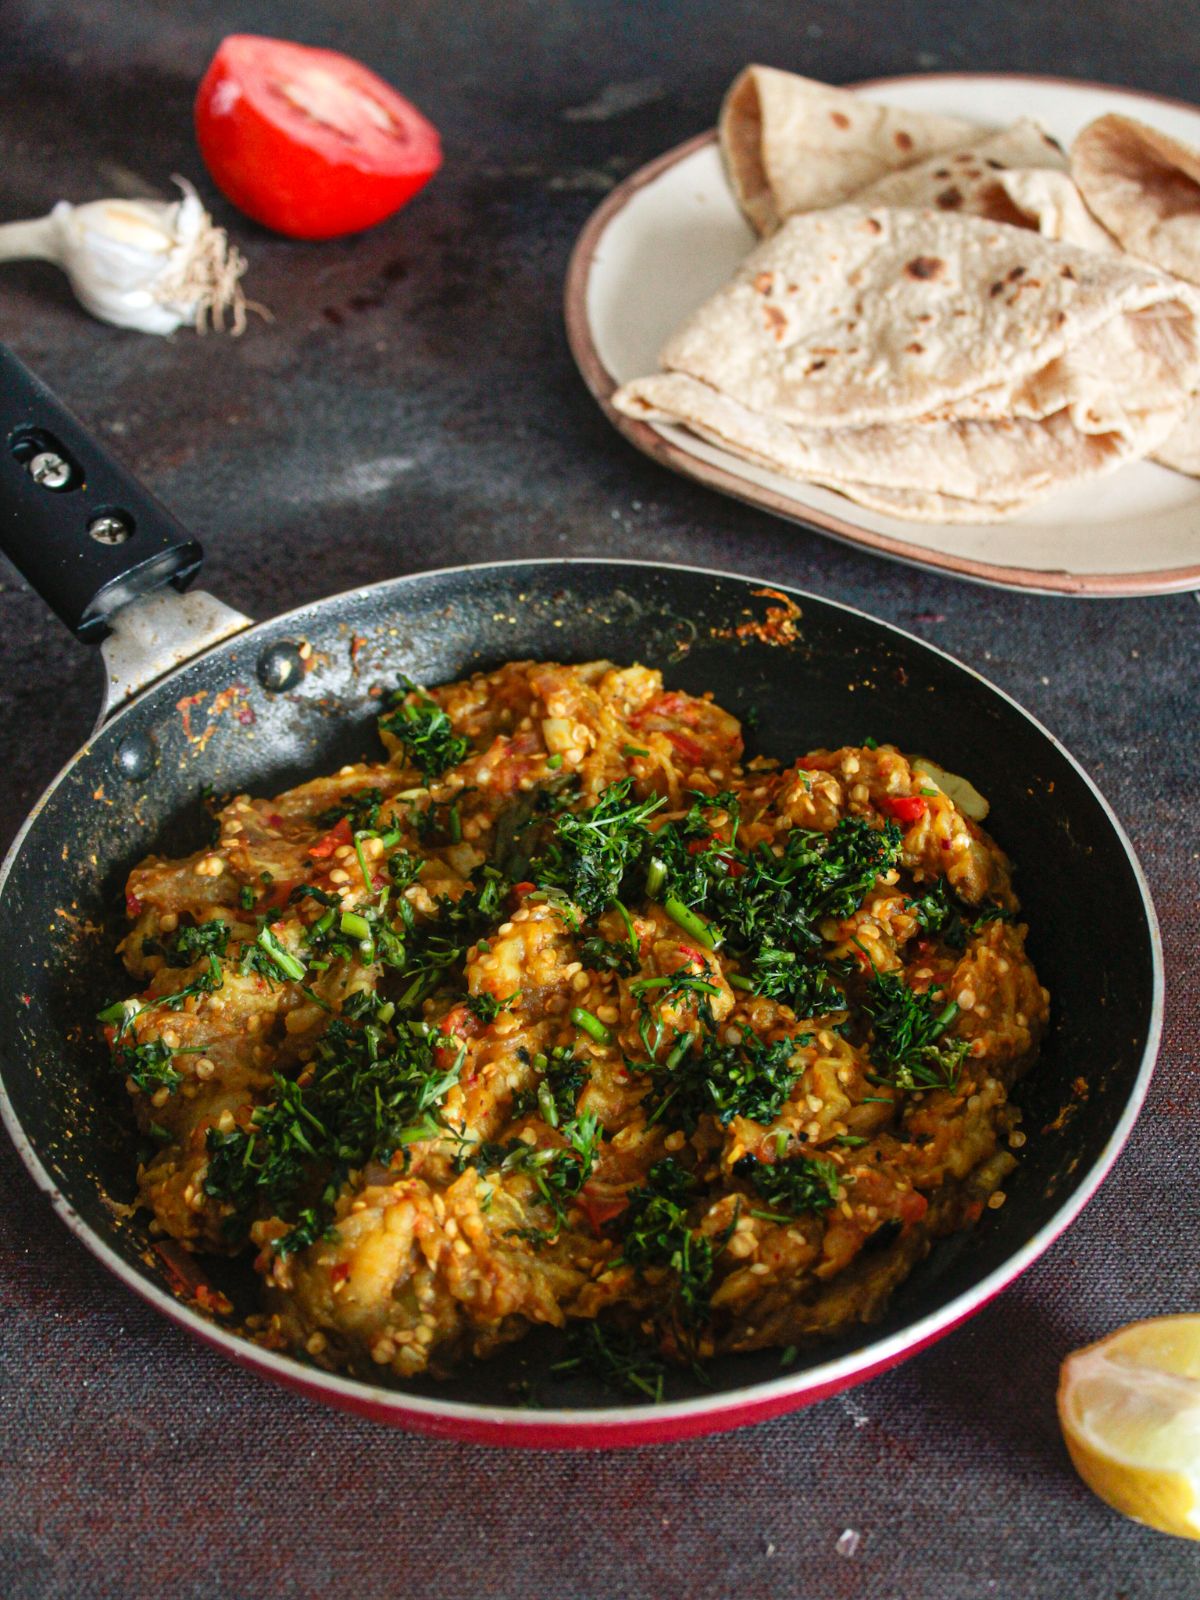 Baingan bharta in skillet topped with coriander next to plate of fresh roti